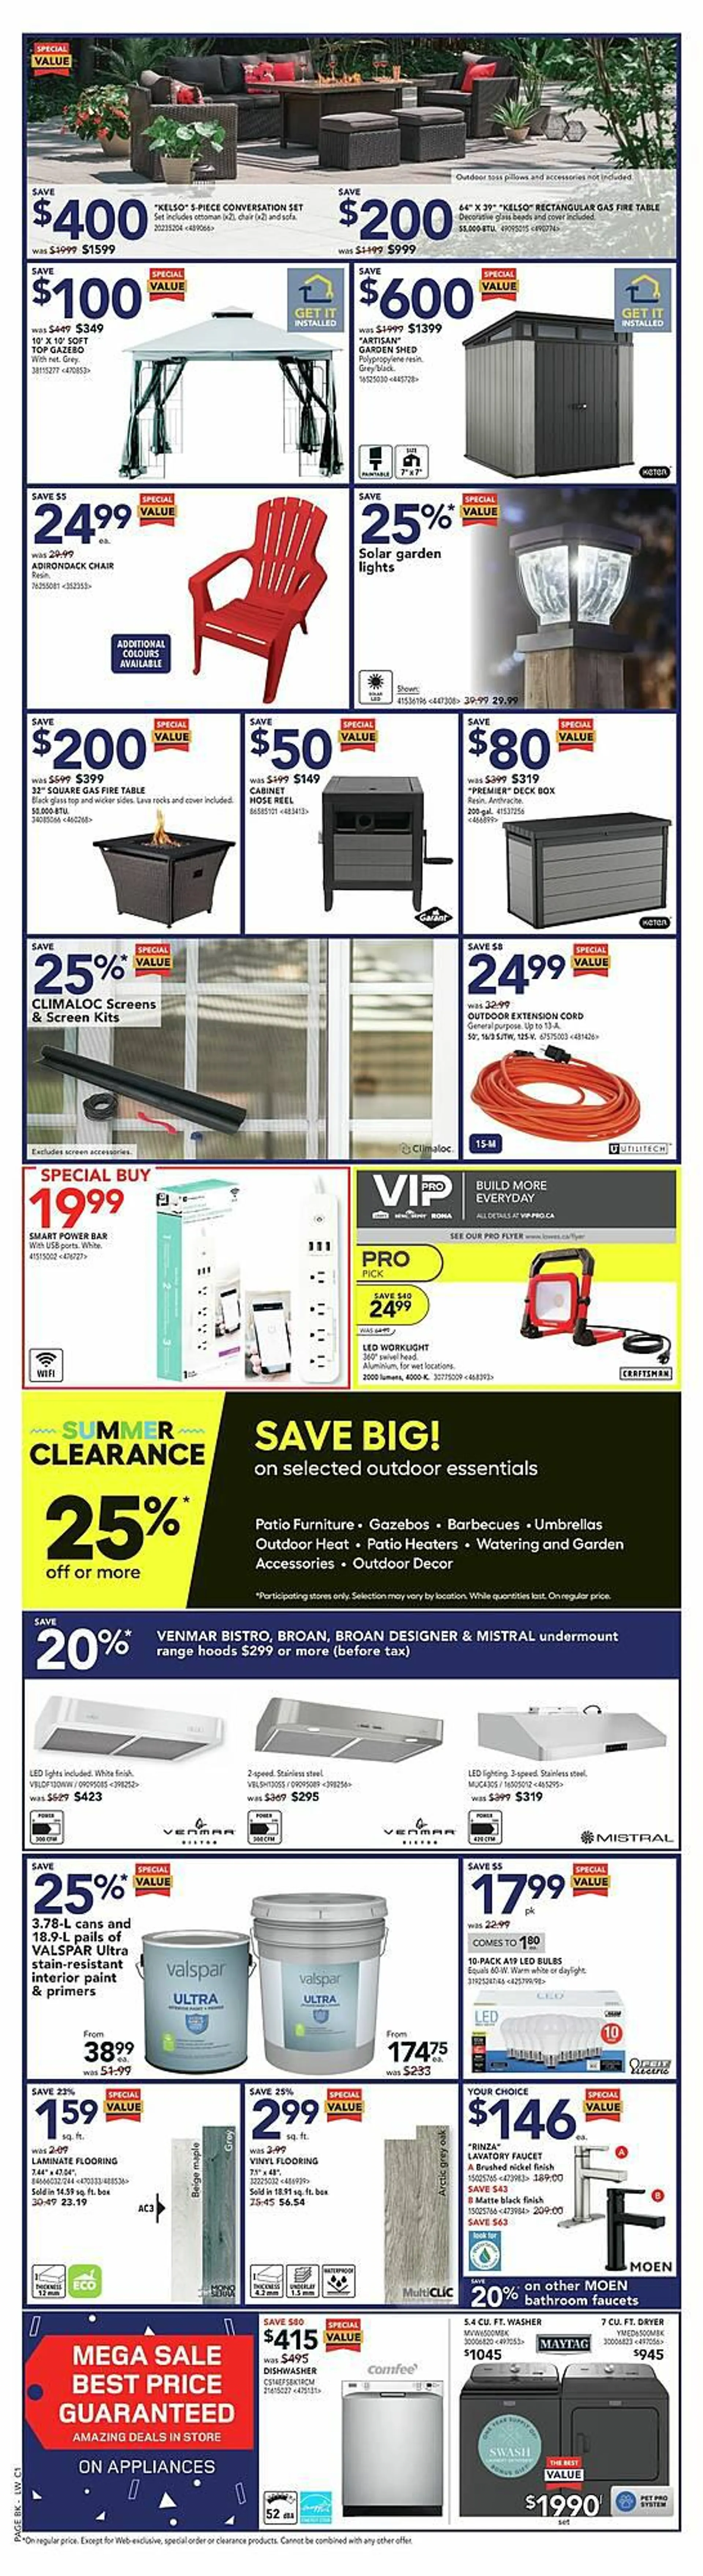 Lowes flyer - 2